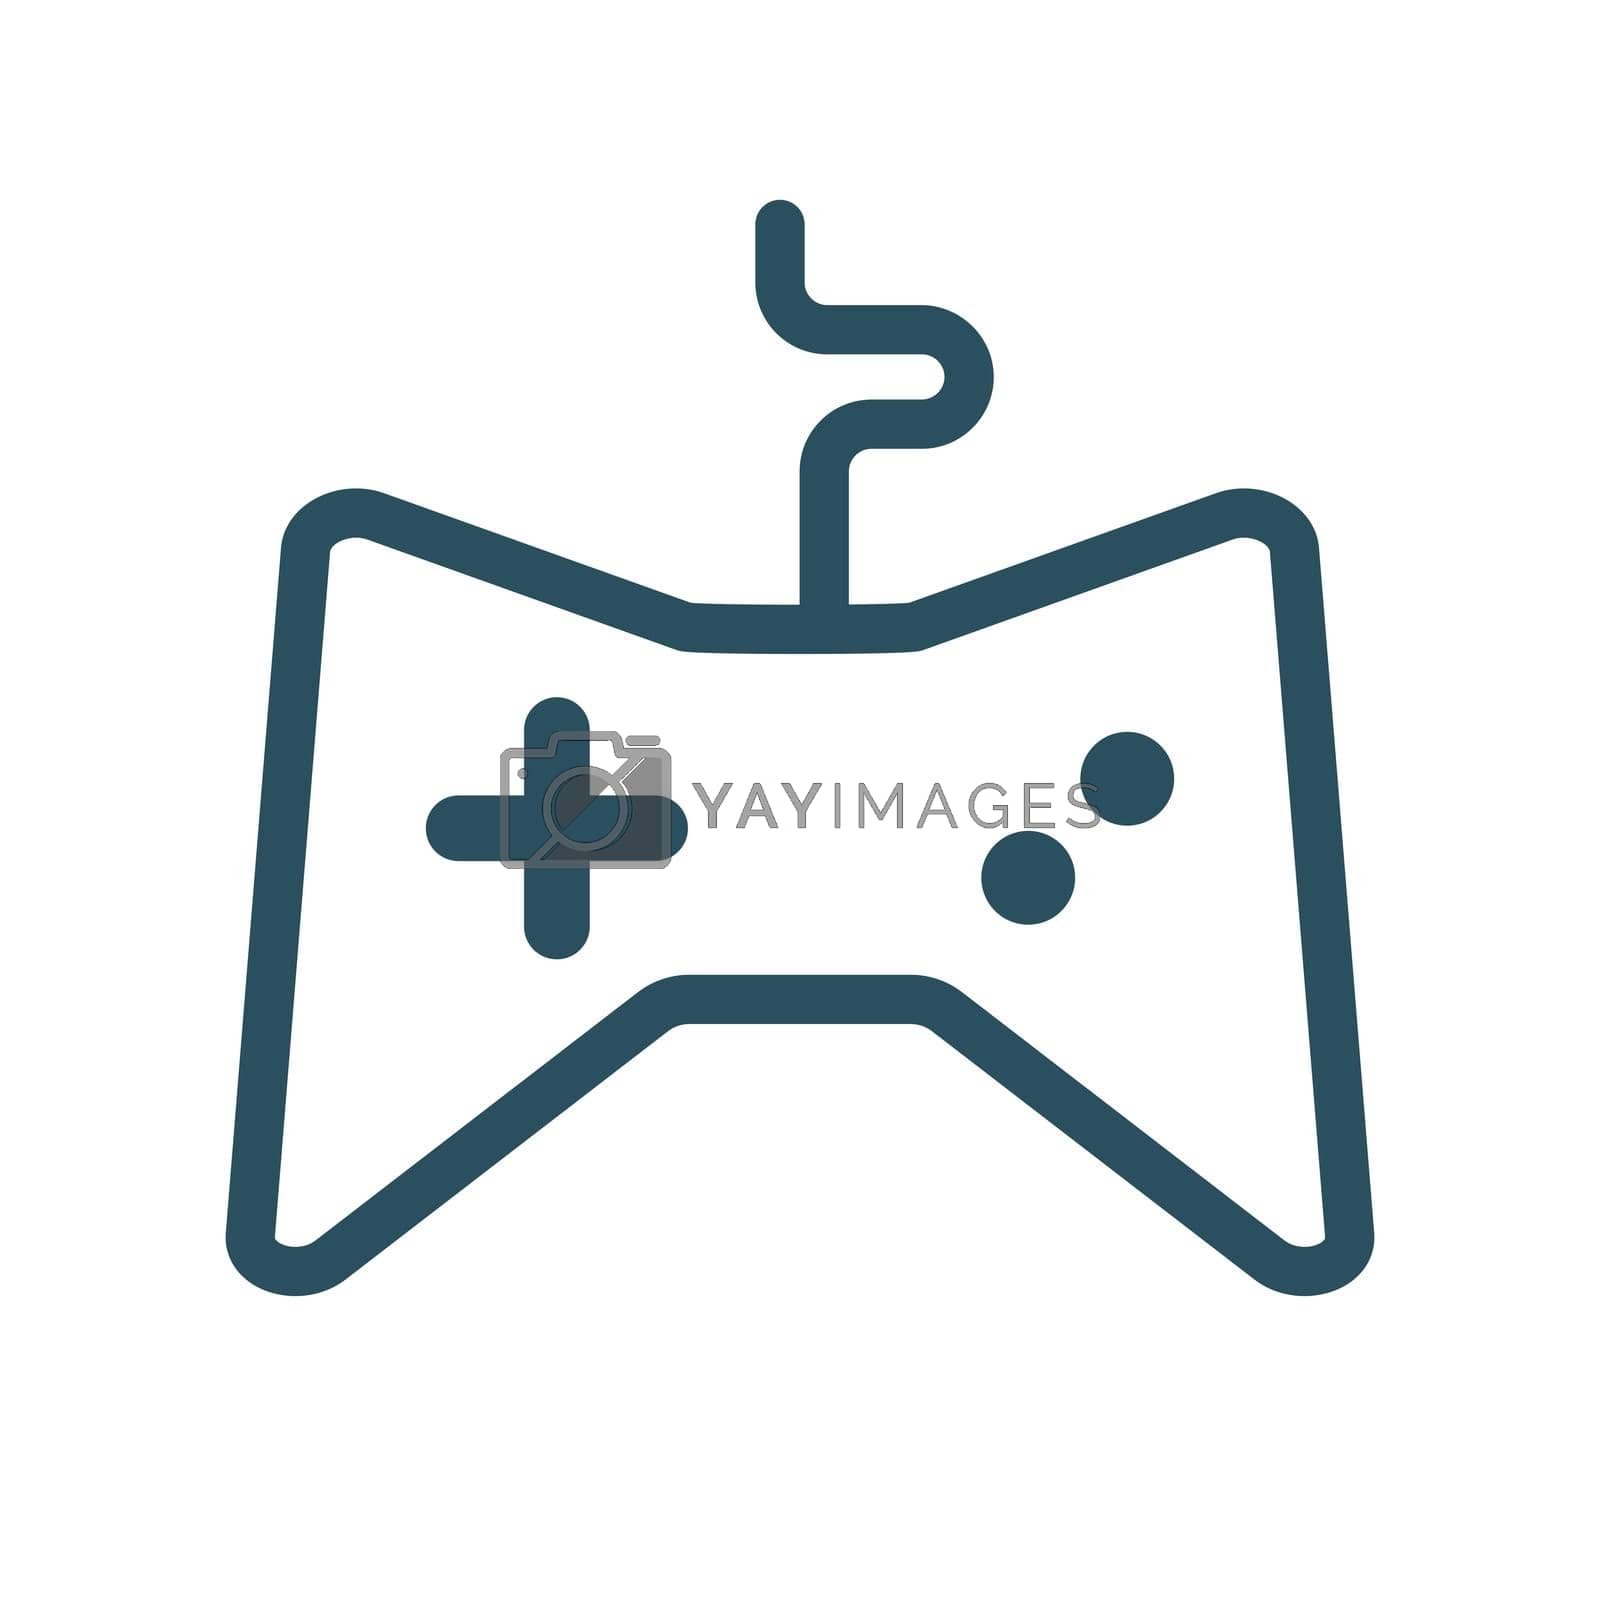 Royalty free image of Corded game controller. Game symbol. Vector. by illust_monster